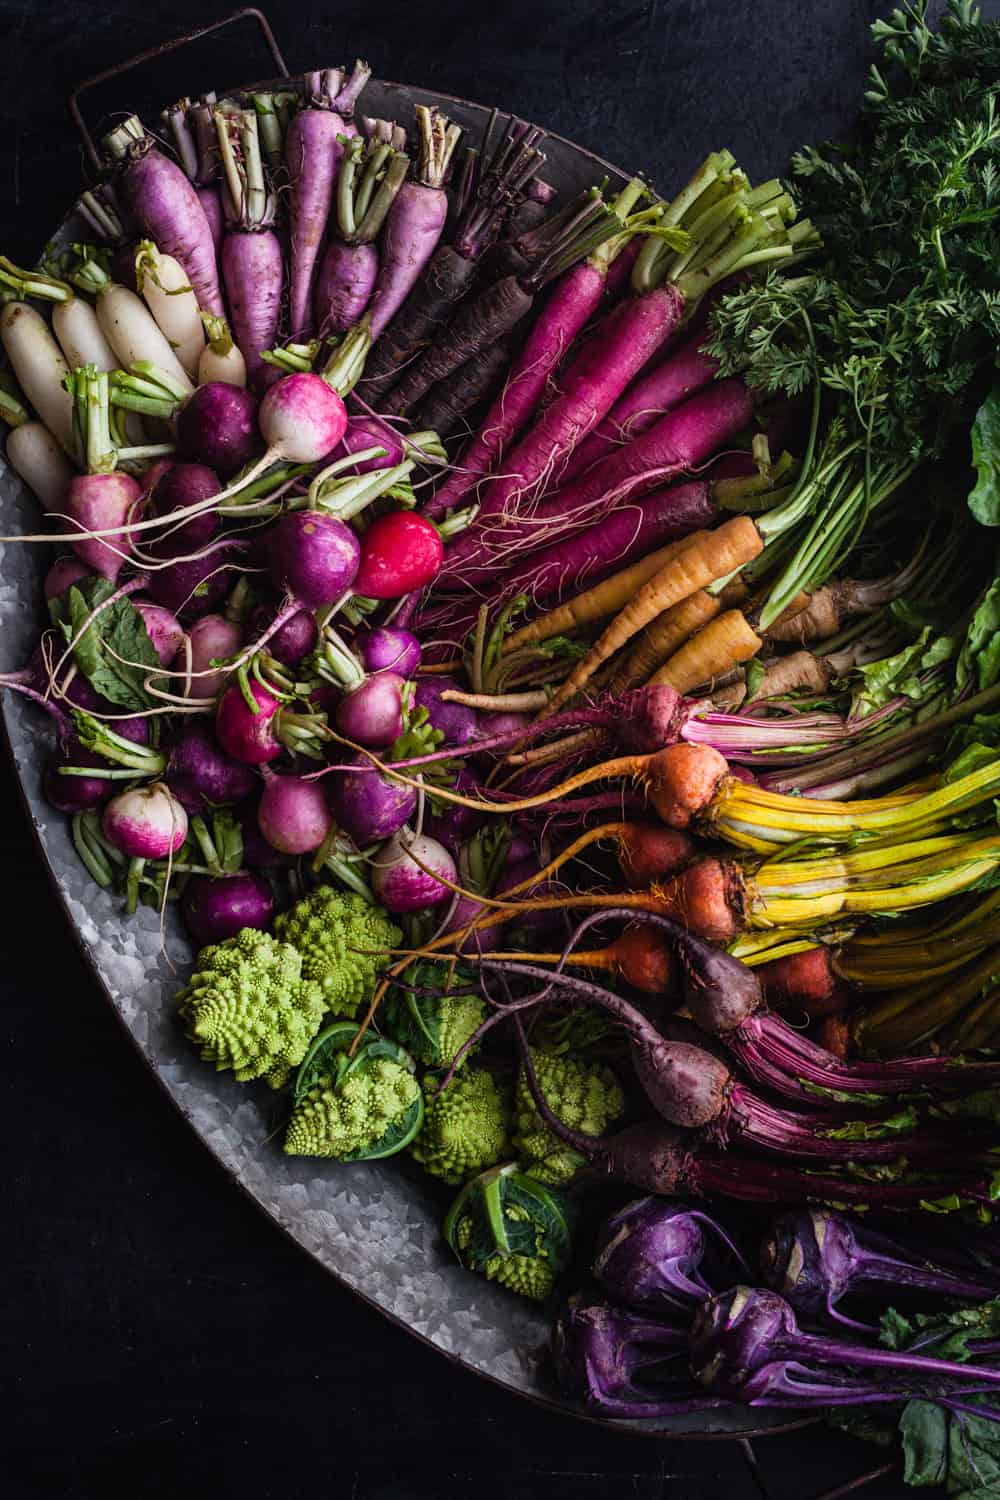 Platter filled with rainbow baby sized root veggies; radishes, beets, kohlrabi, carrots and Romanesco.